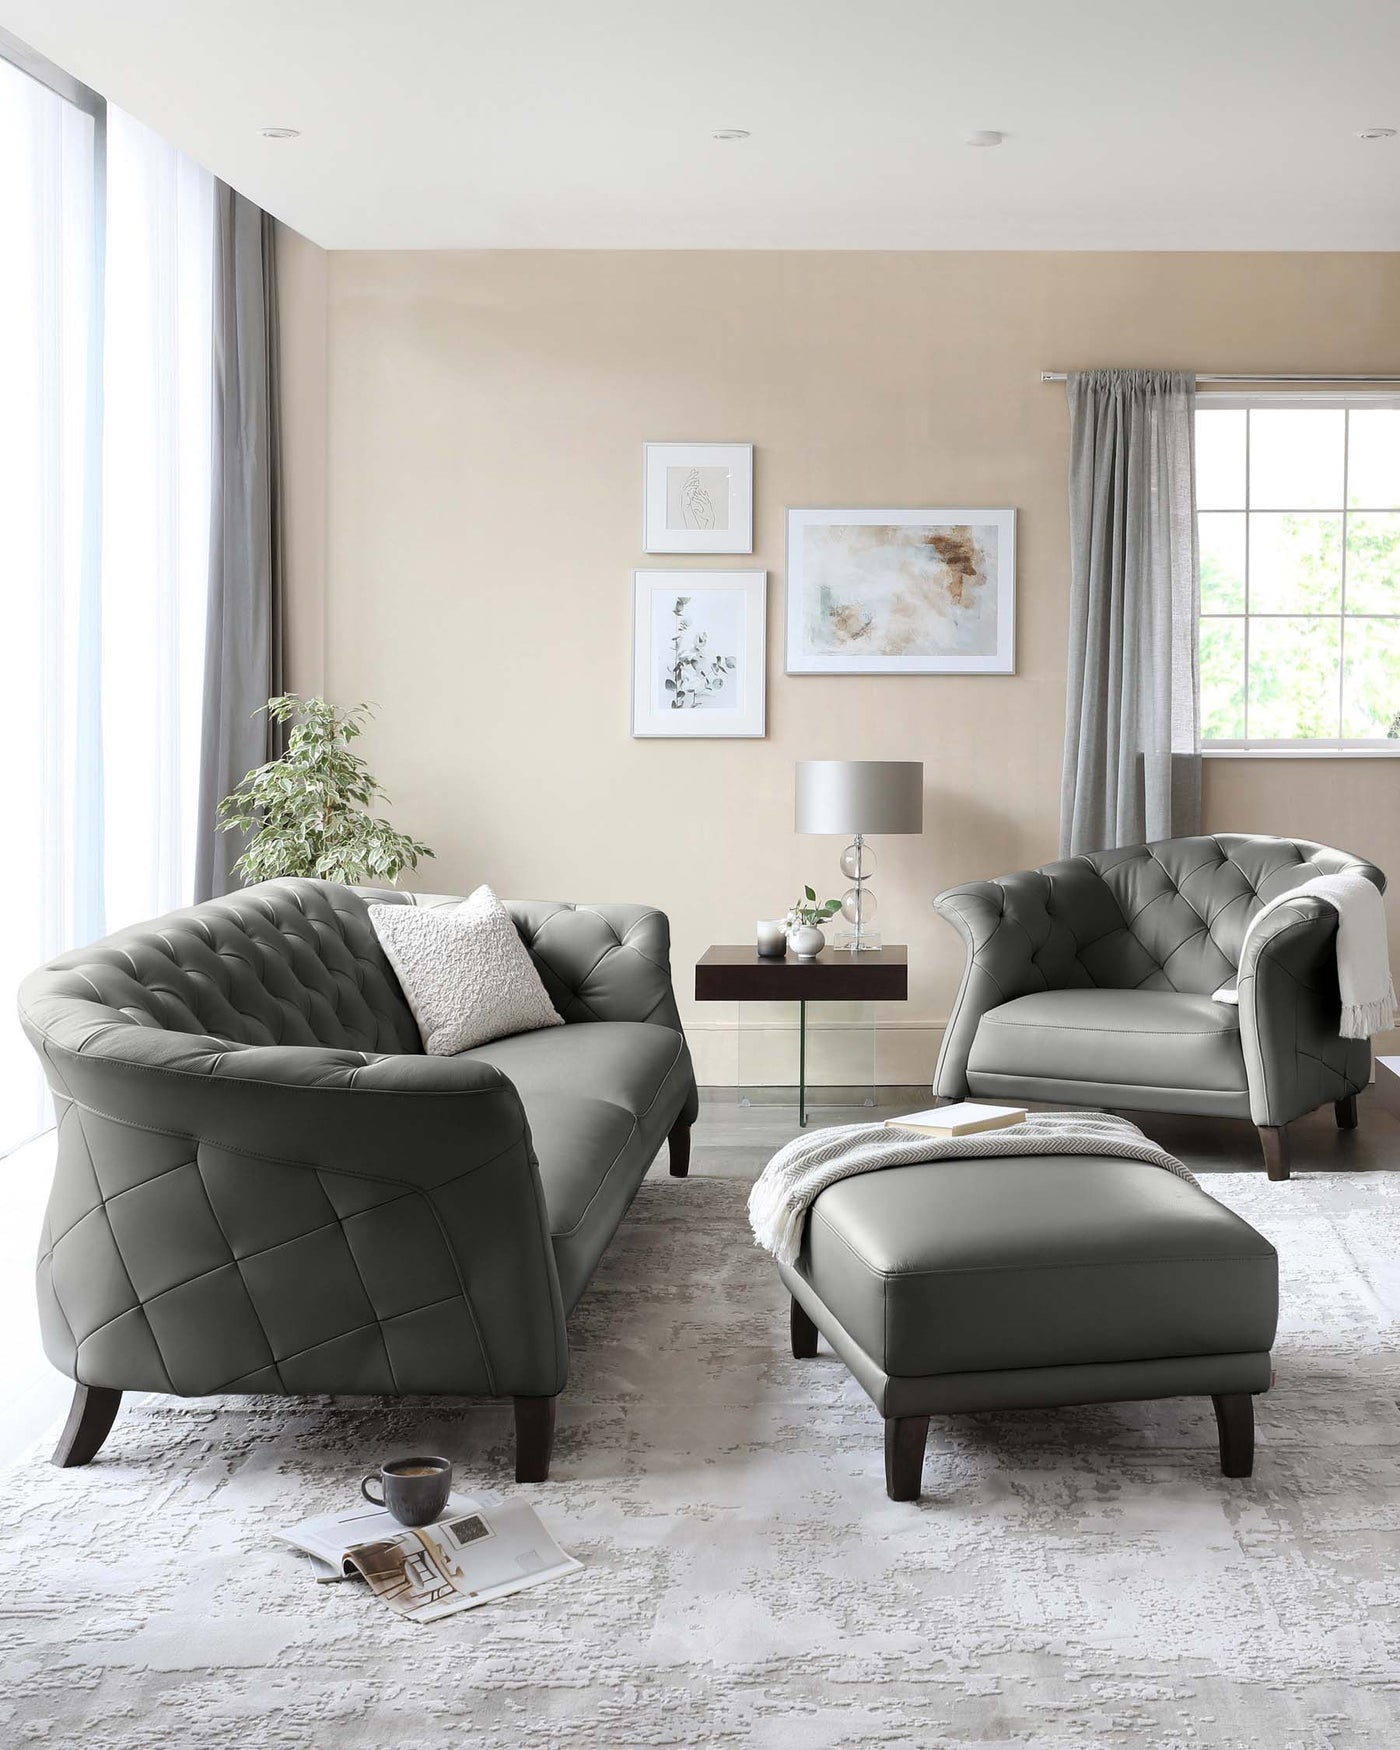 Elegant living room set featuring a tufted dark grey sofa with a matching armchair and ottoman, all with dark wood legs. The set is complemented by a light grey and white area rug and a modern dark brown side table with a table lamp.